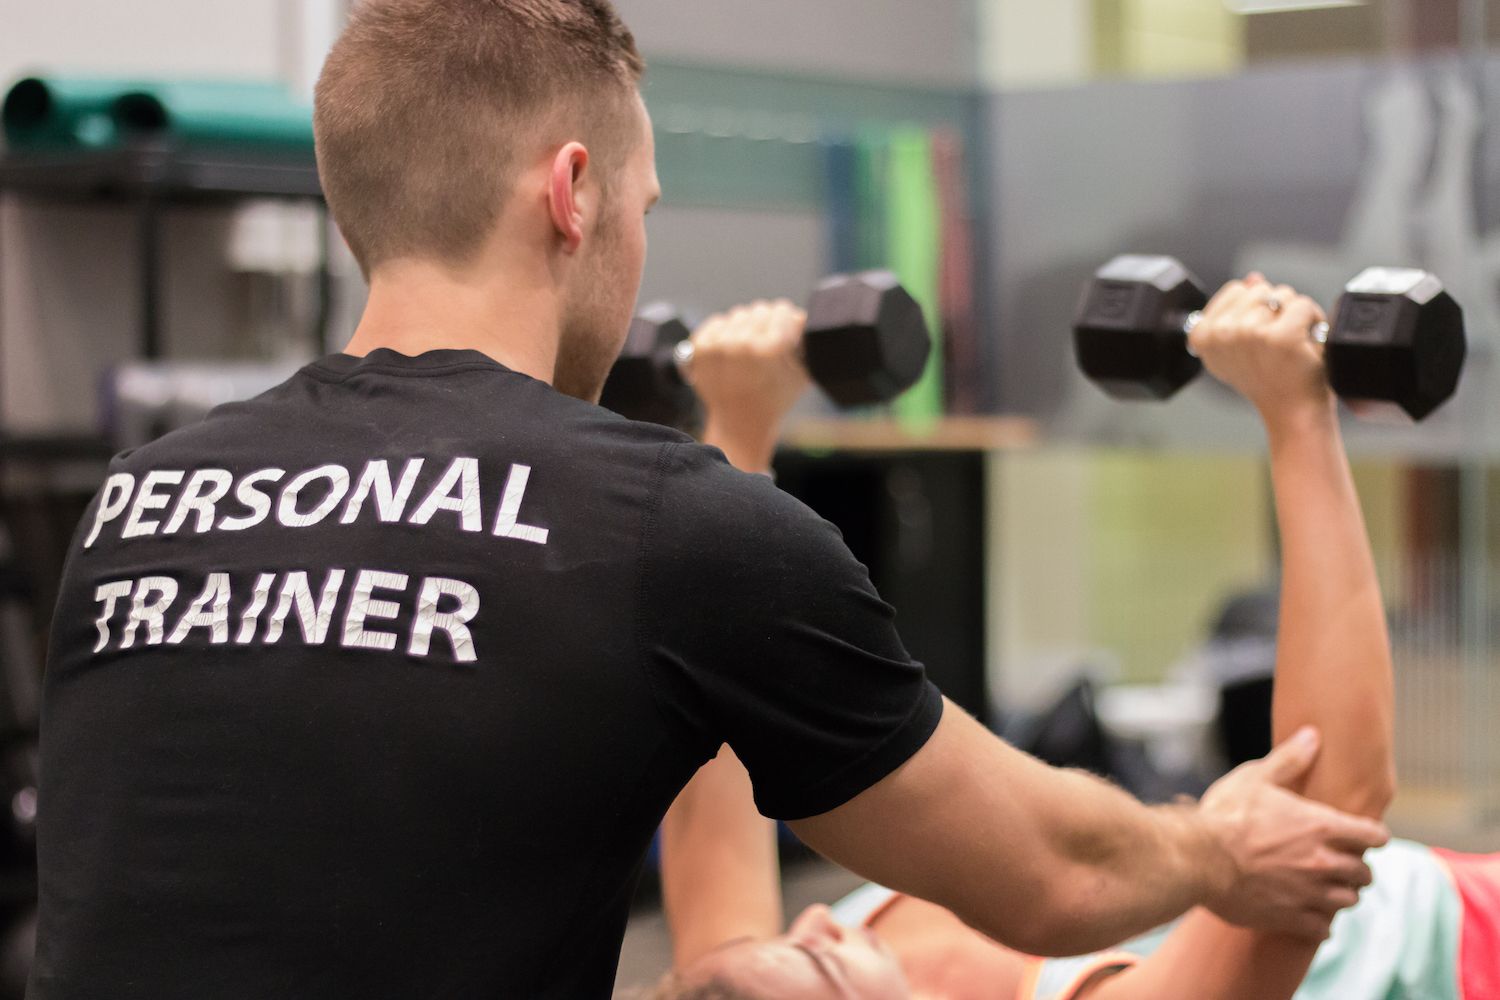 Private Personal Training - 6 weeks - 12 Sessions ($130)